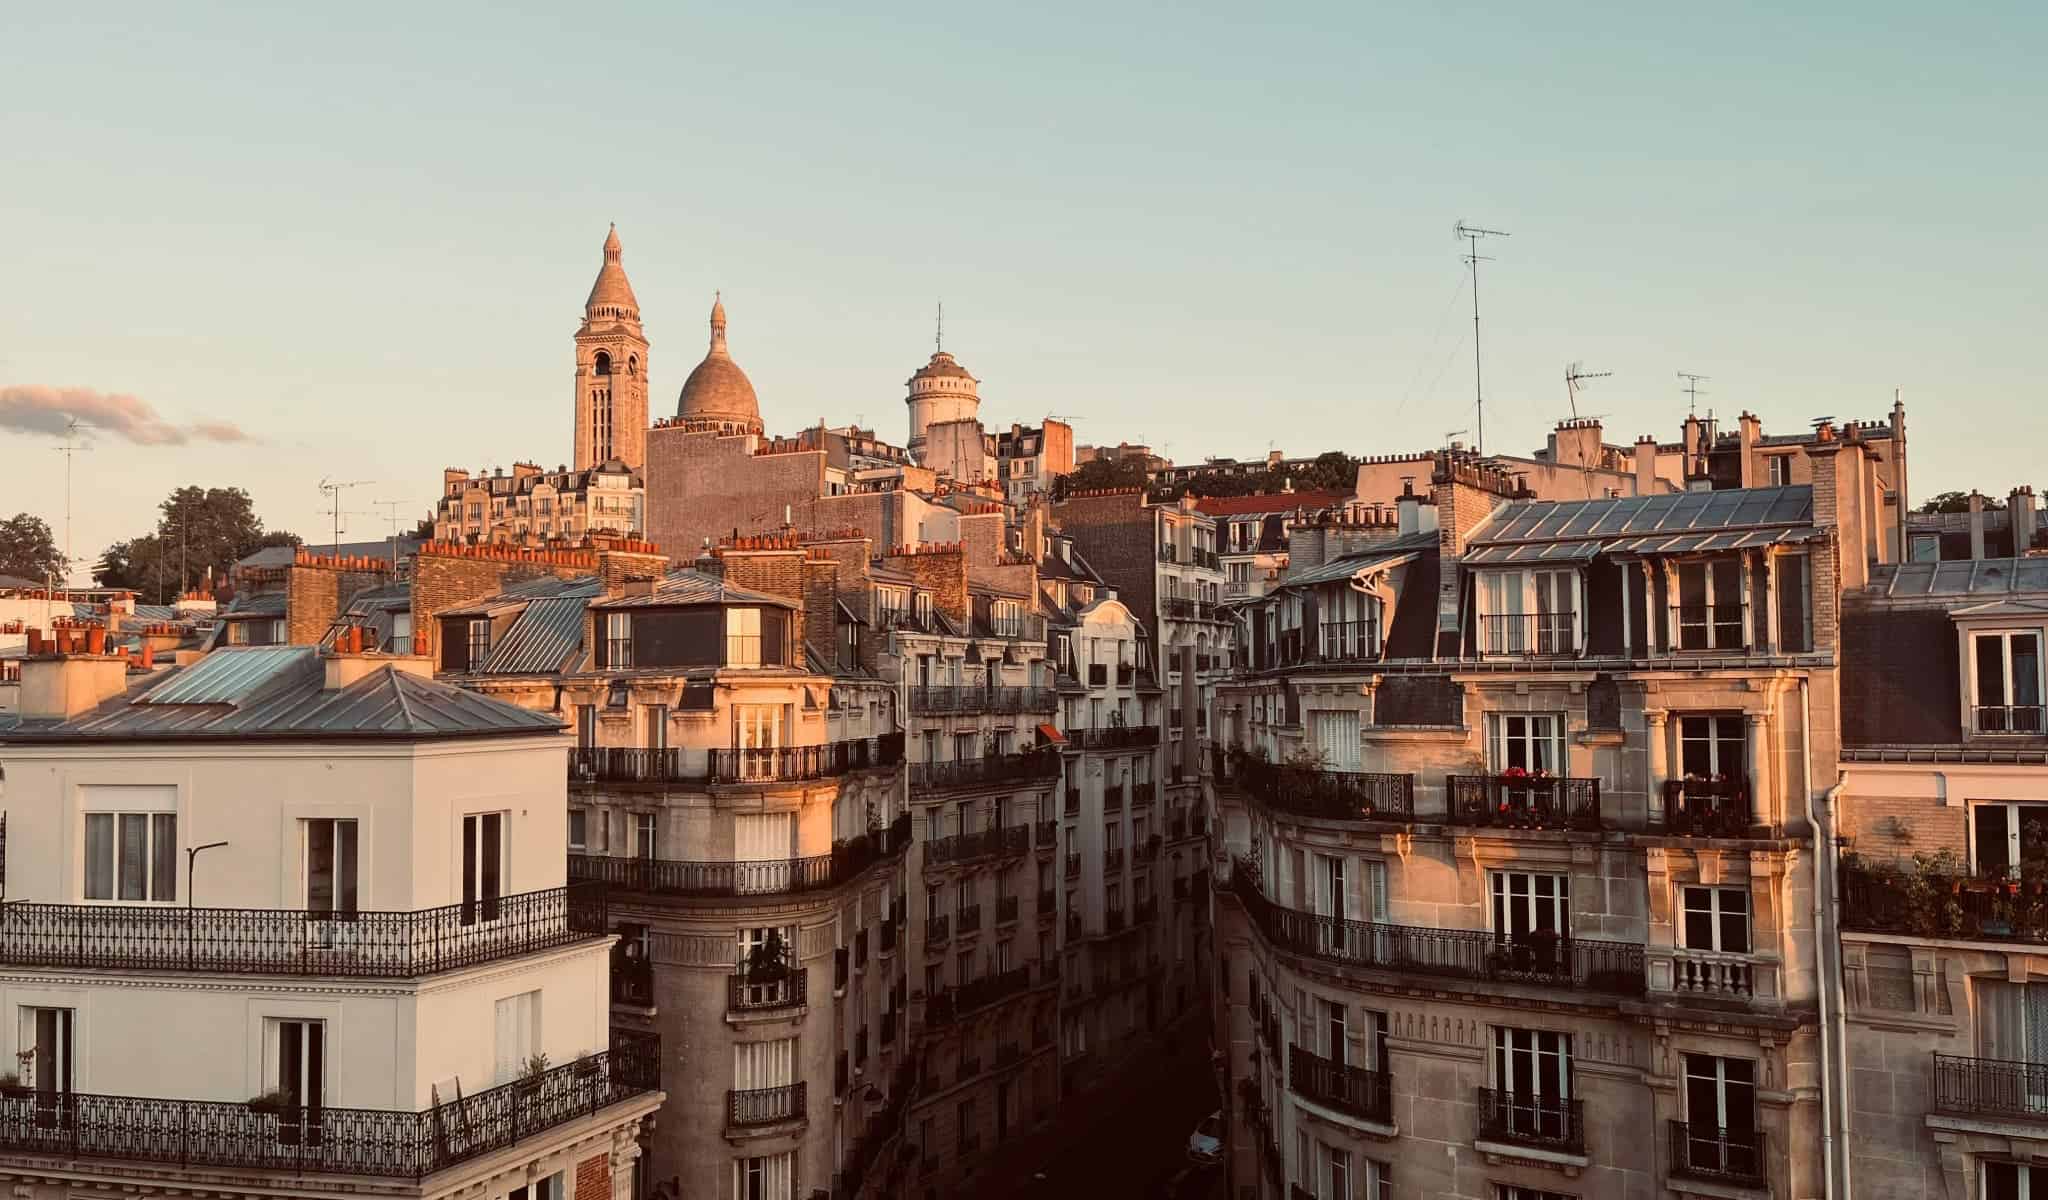 Montmartre Paris with city skyline and view of Sacre Coeur